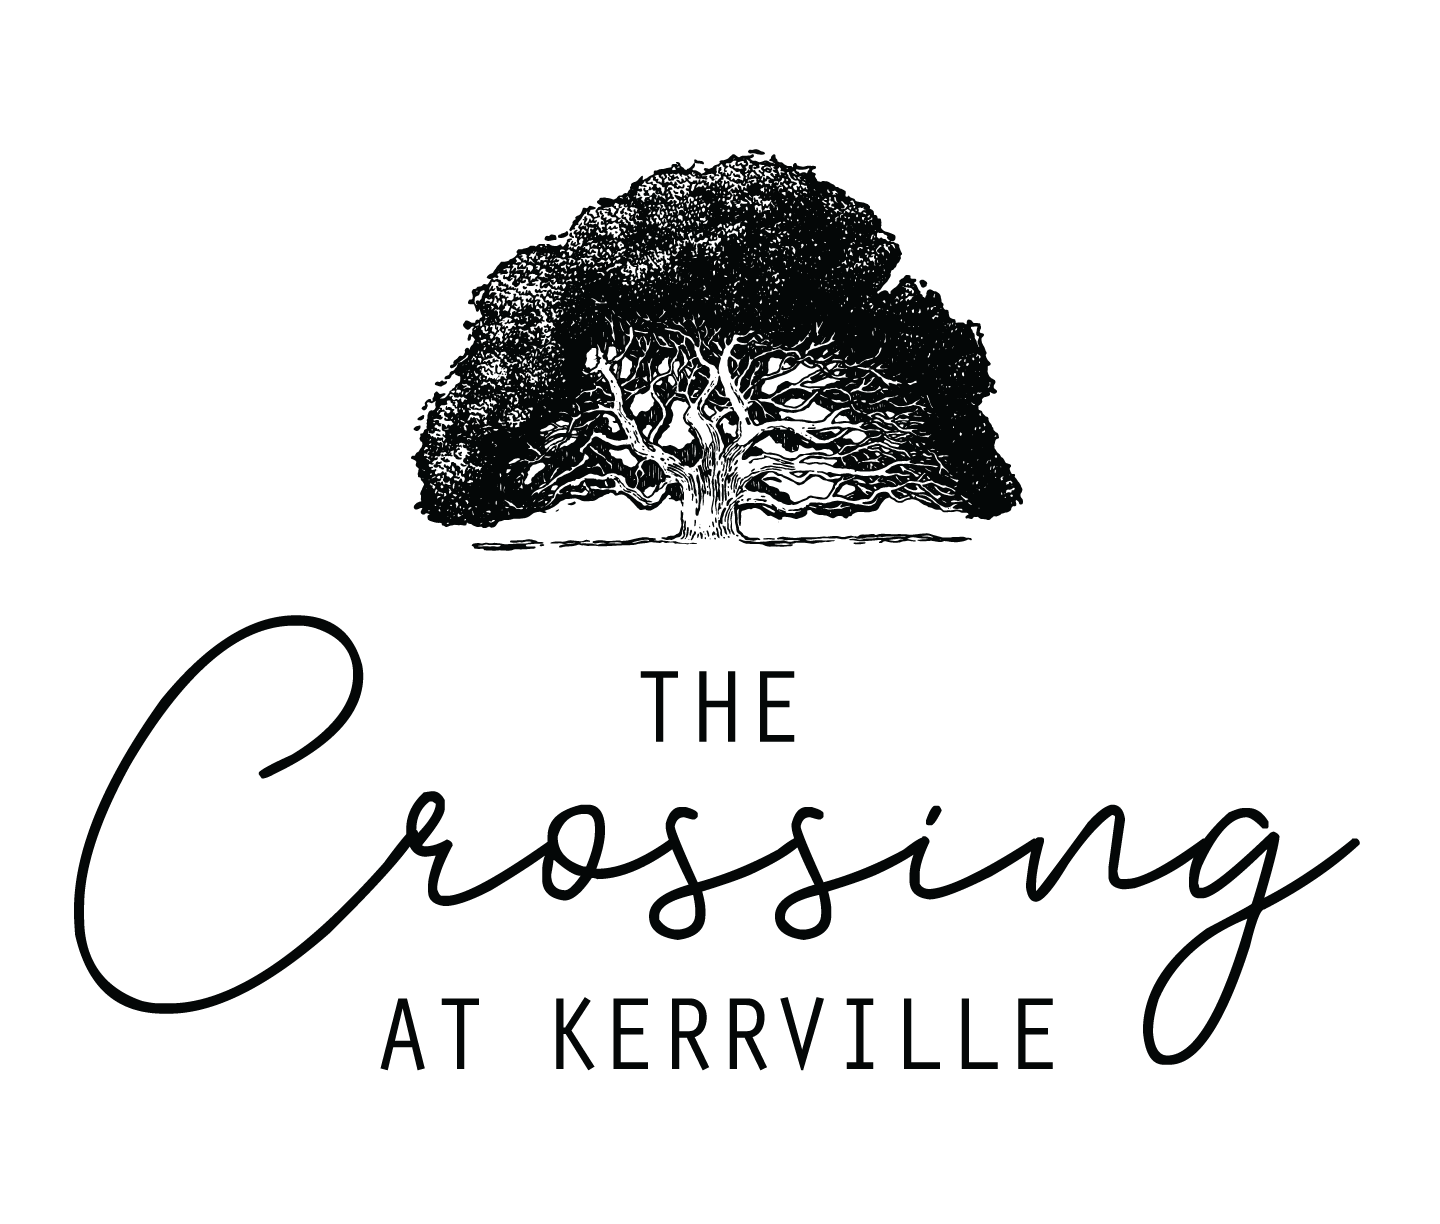 The Crossing at Kerrville